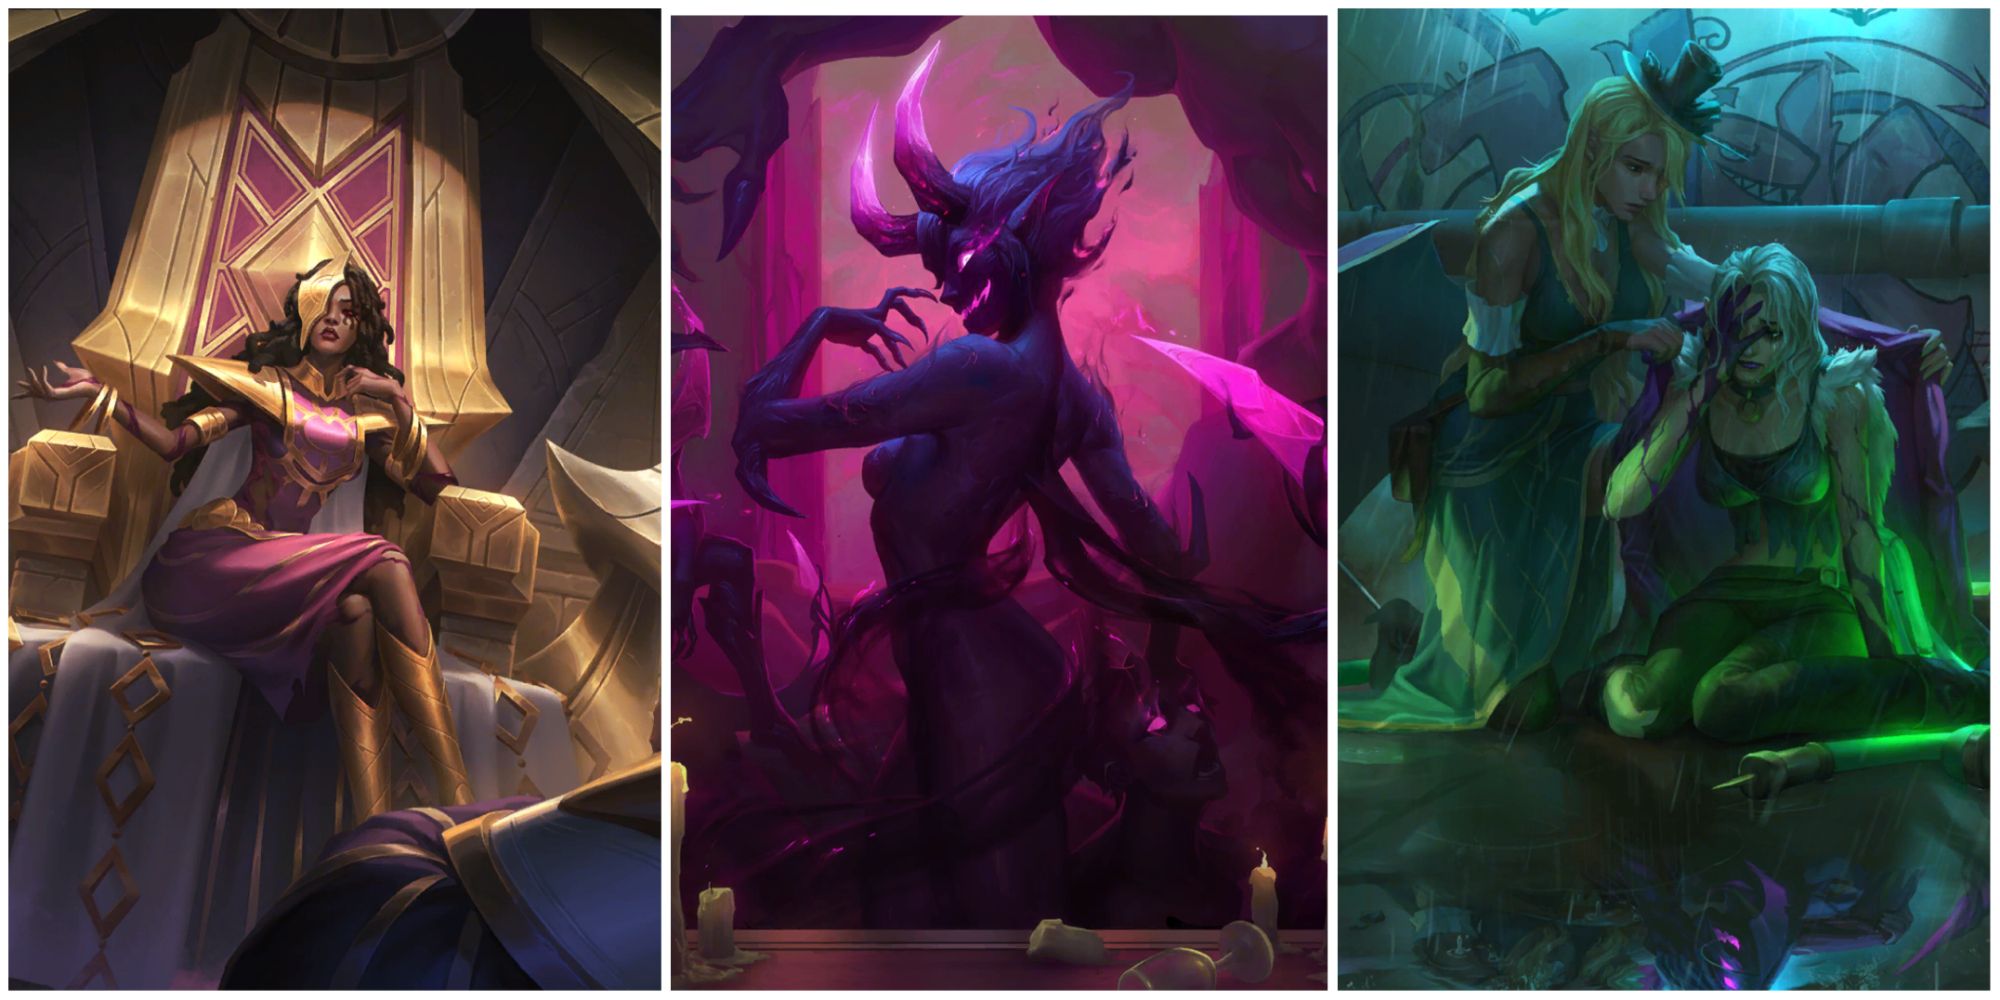 Legends of Runeterra: Forces Beyond Featured Image Of Domination, Evolved Evelynn, Solitude